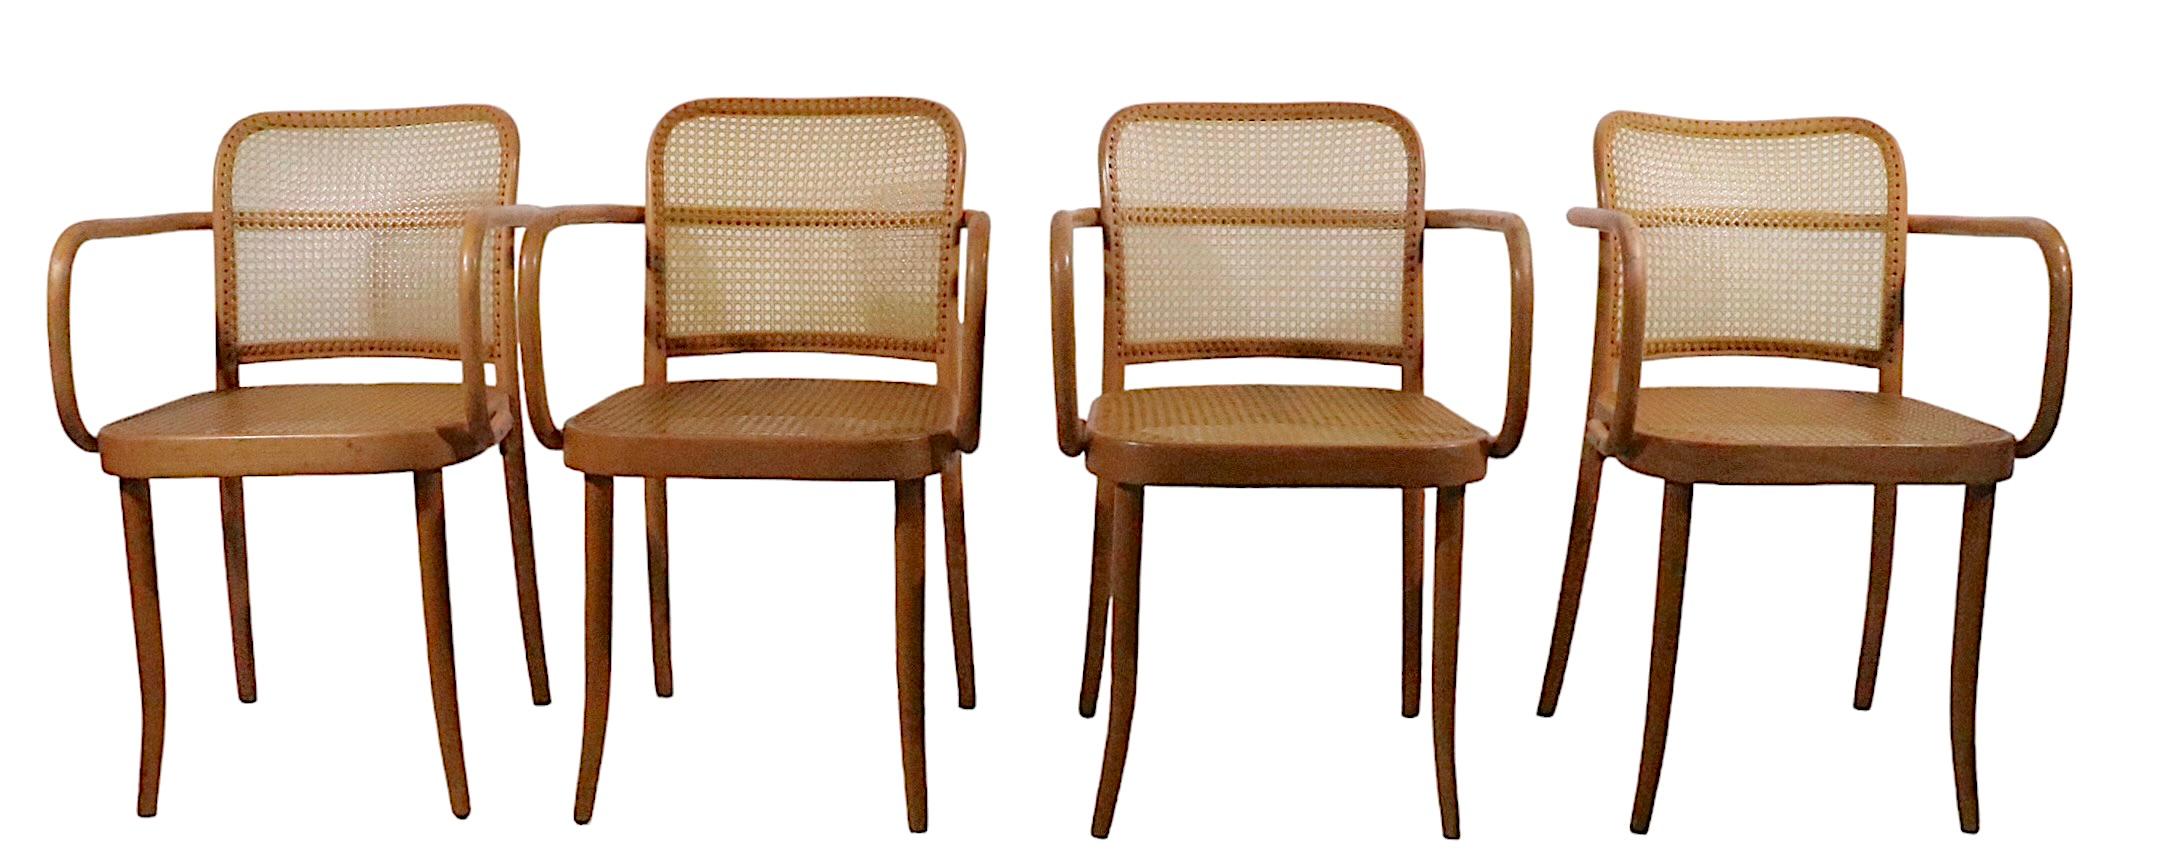 20th Century Set of 5 Josef Frank Prague Chairs Made in Czechoslovakia, circa 1970s For Sale